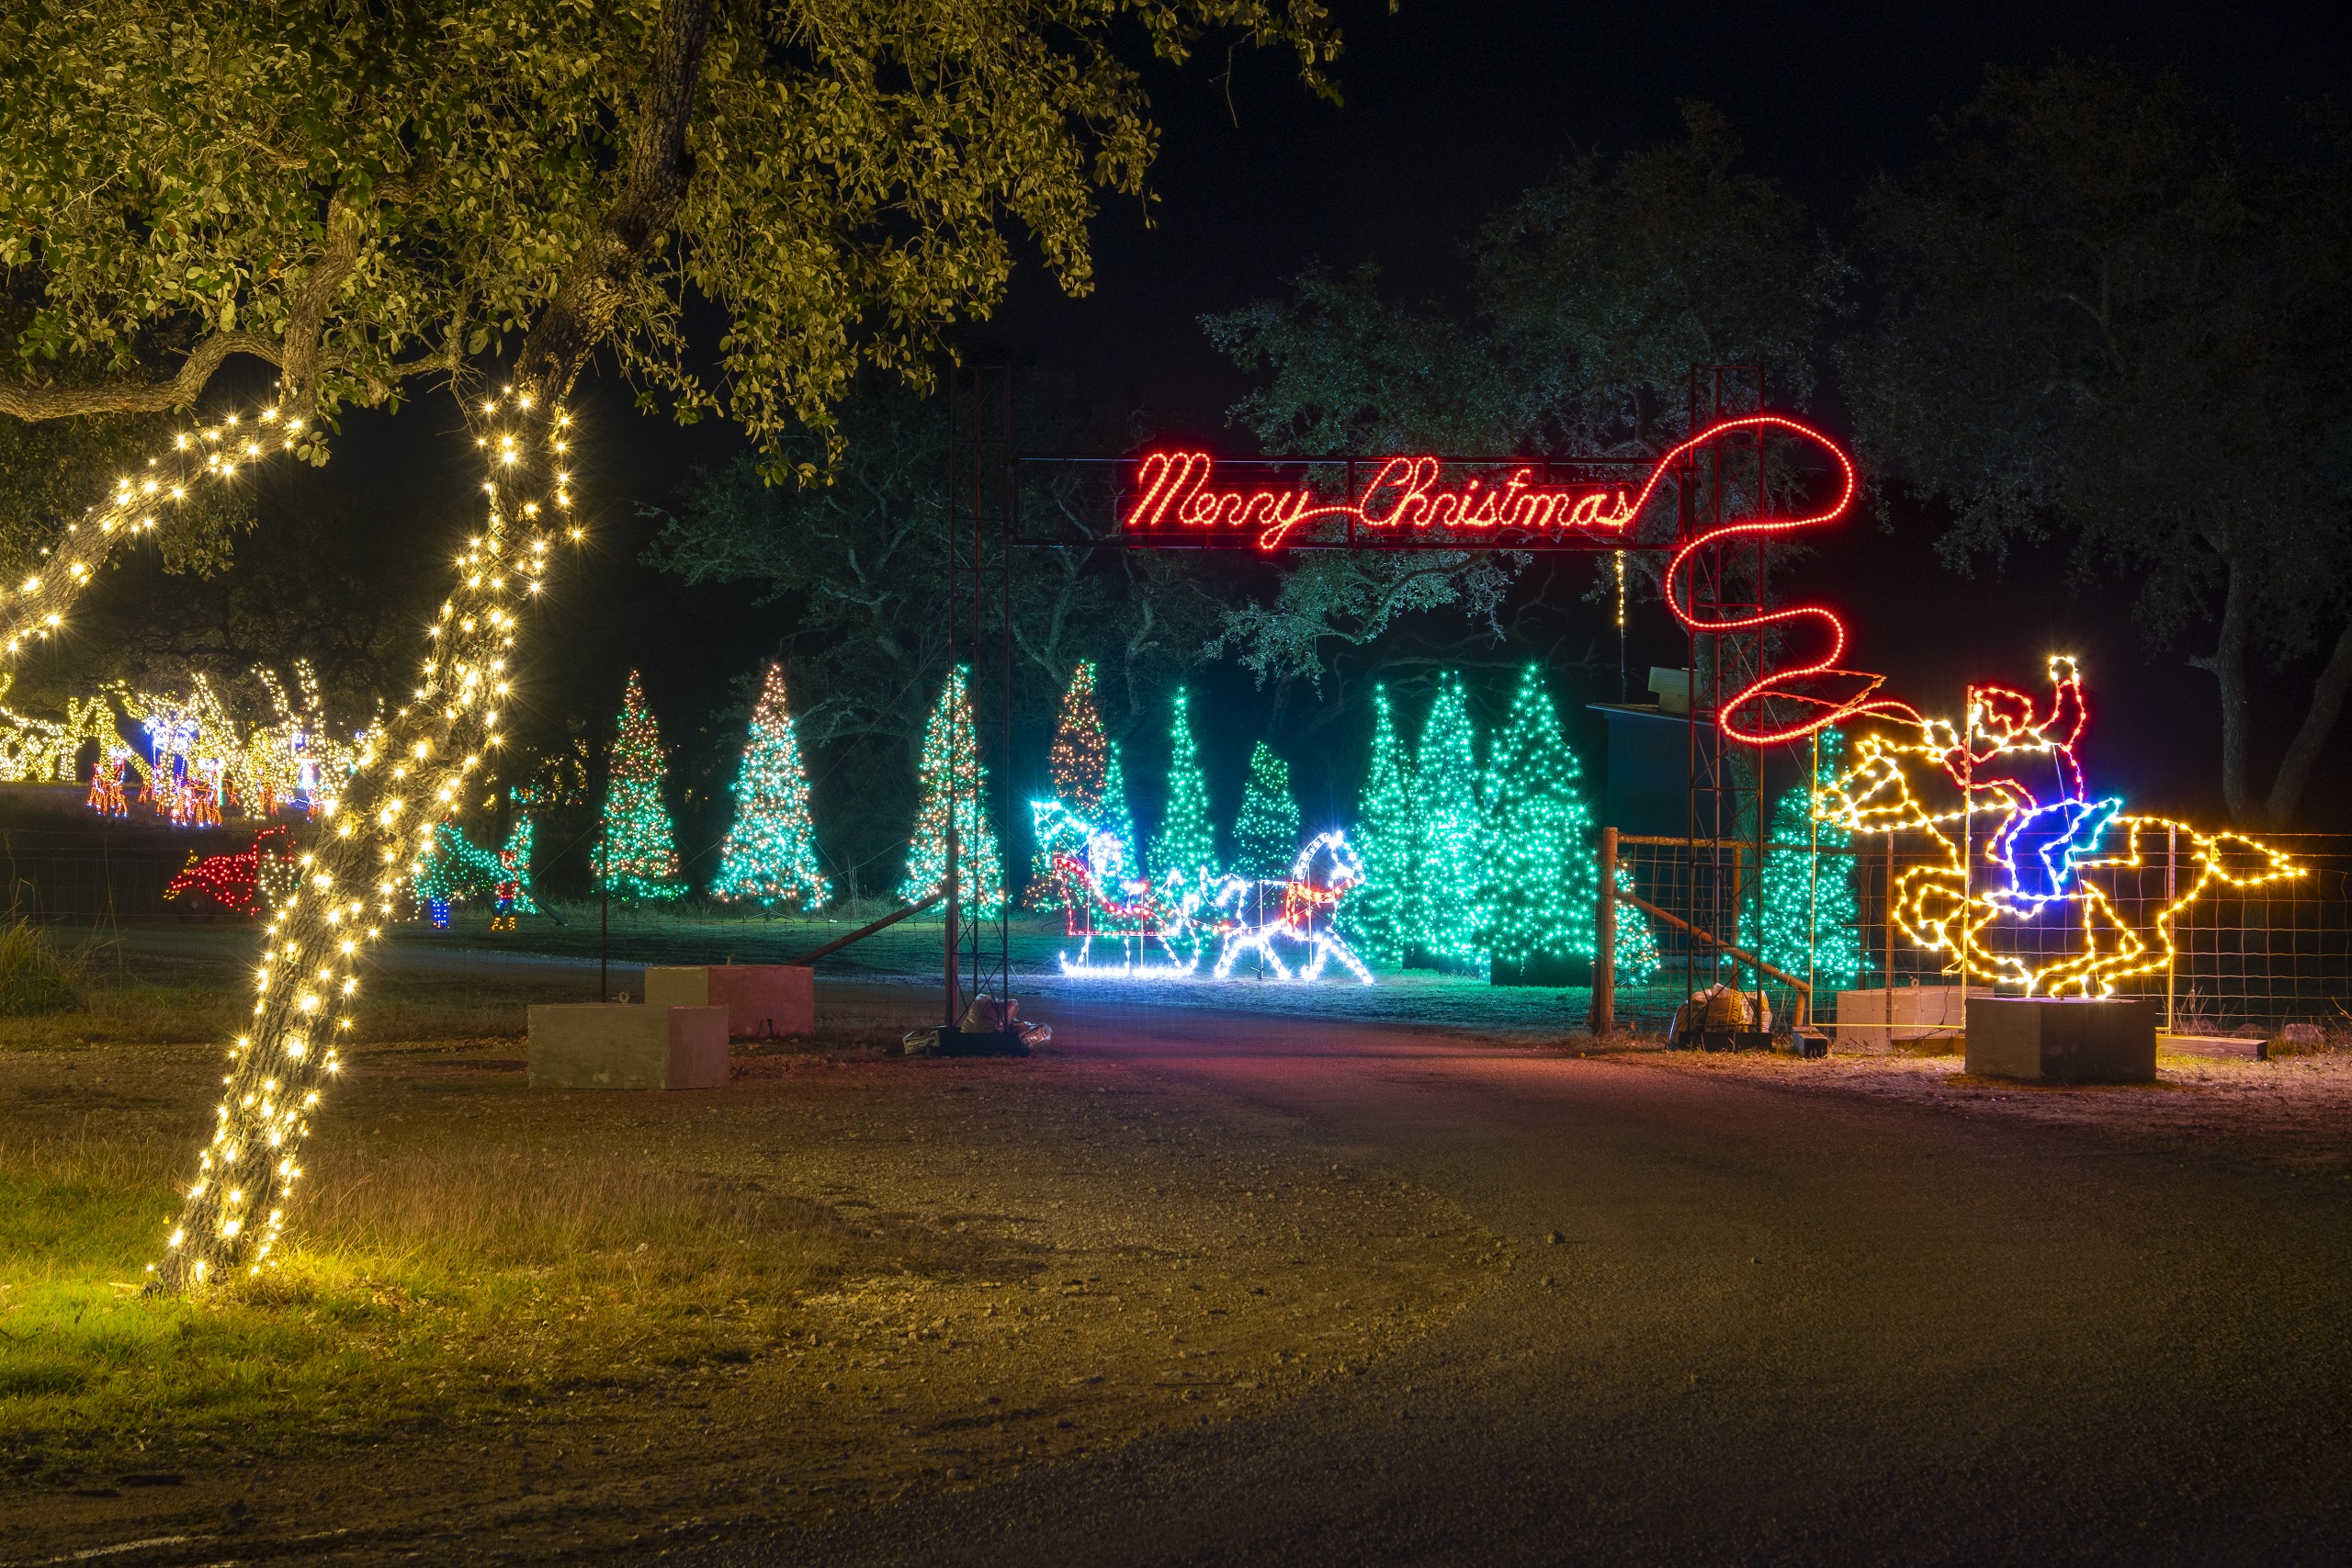 Christmas light scene with trees, horse rider spelling out Merry Christmas with rope lights